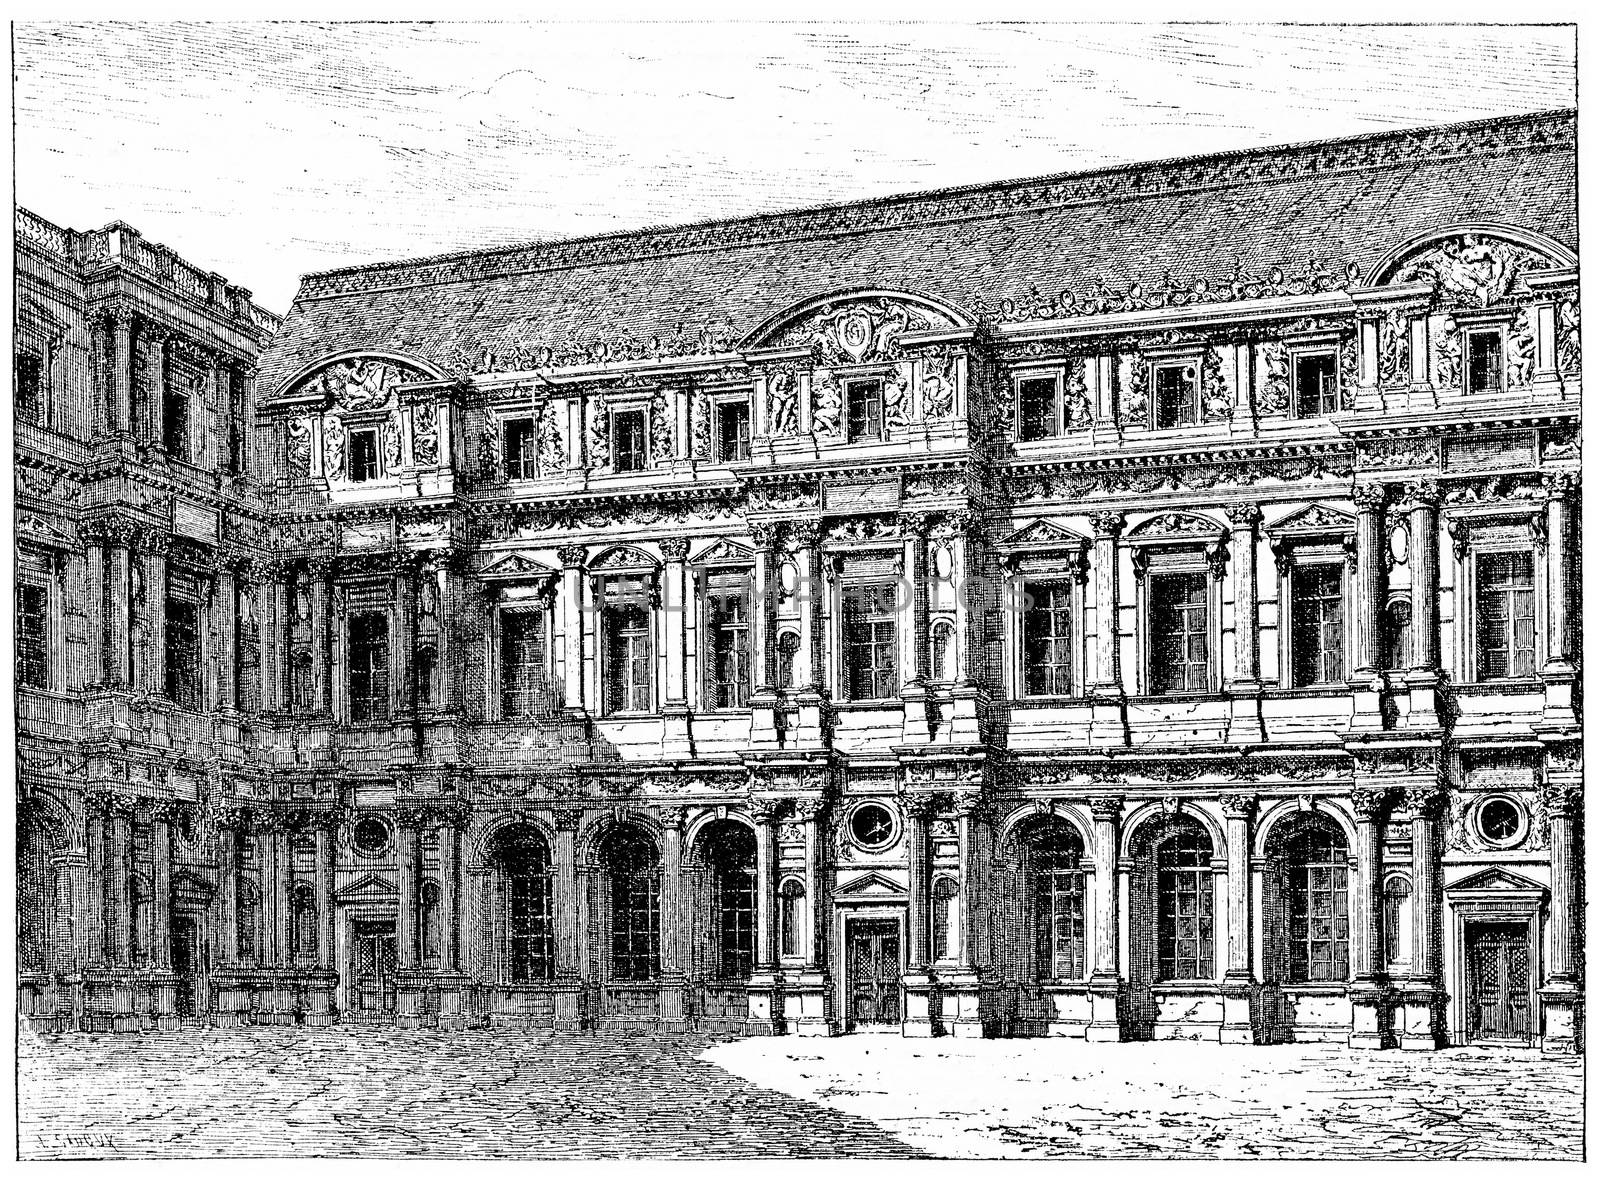 The old Louvre (front of Pierre Lescot), vintage engraving. by Morphart